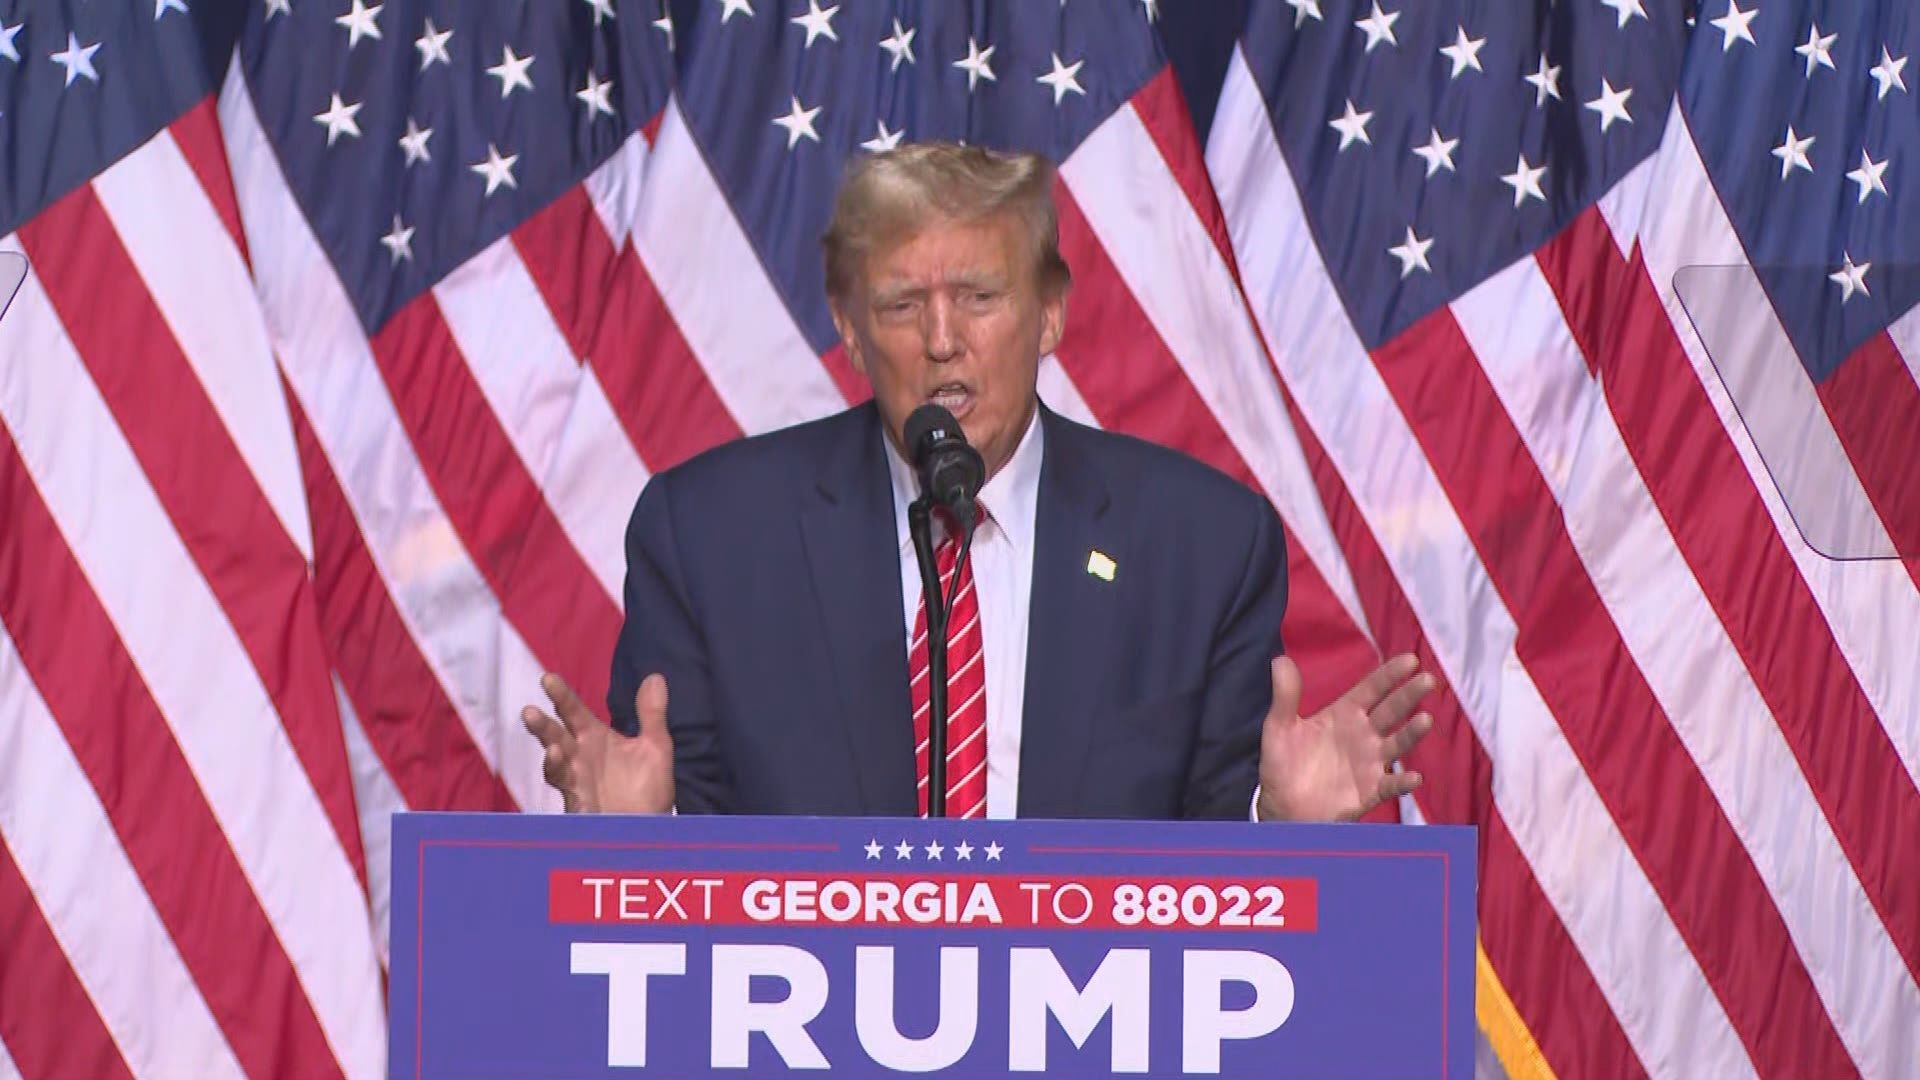 Trump spoke about a number of issues during his speech in Rome, Georgia.